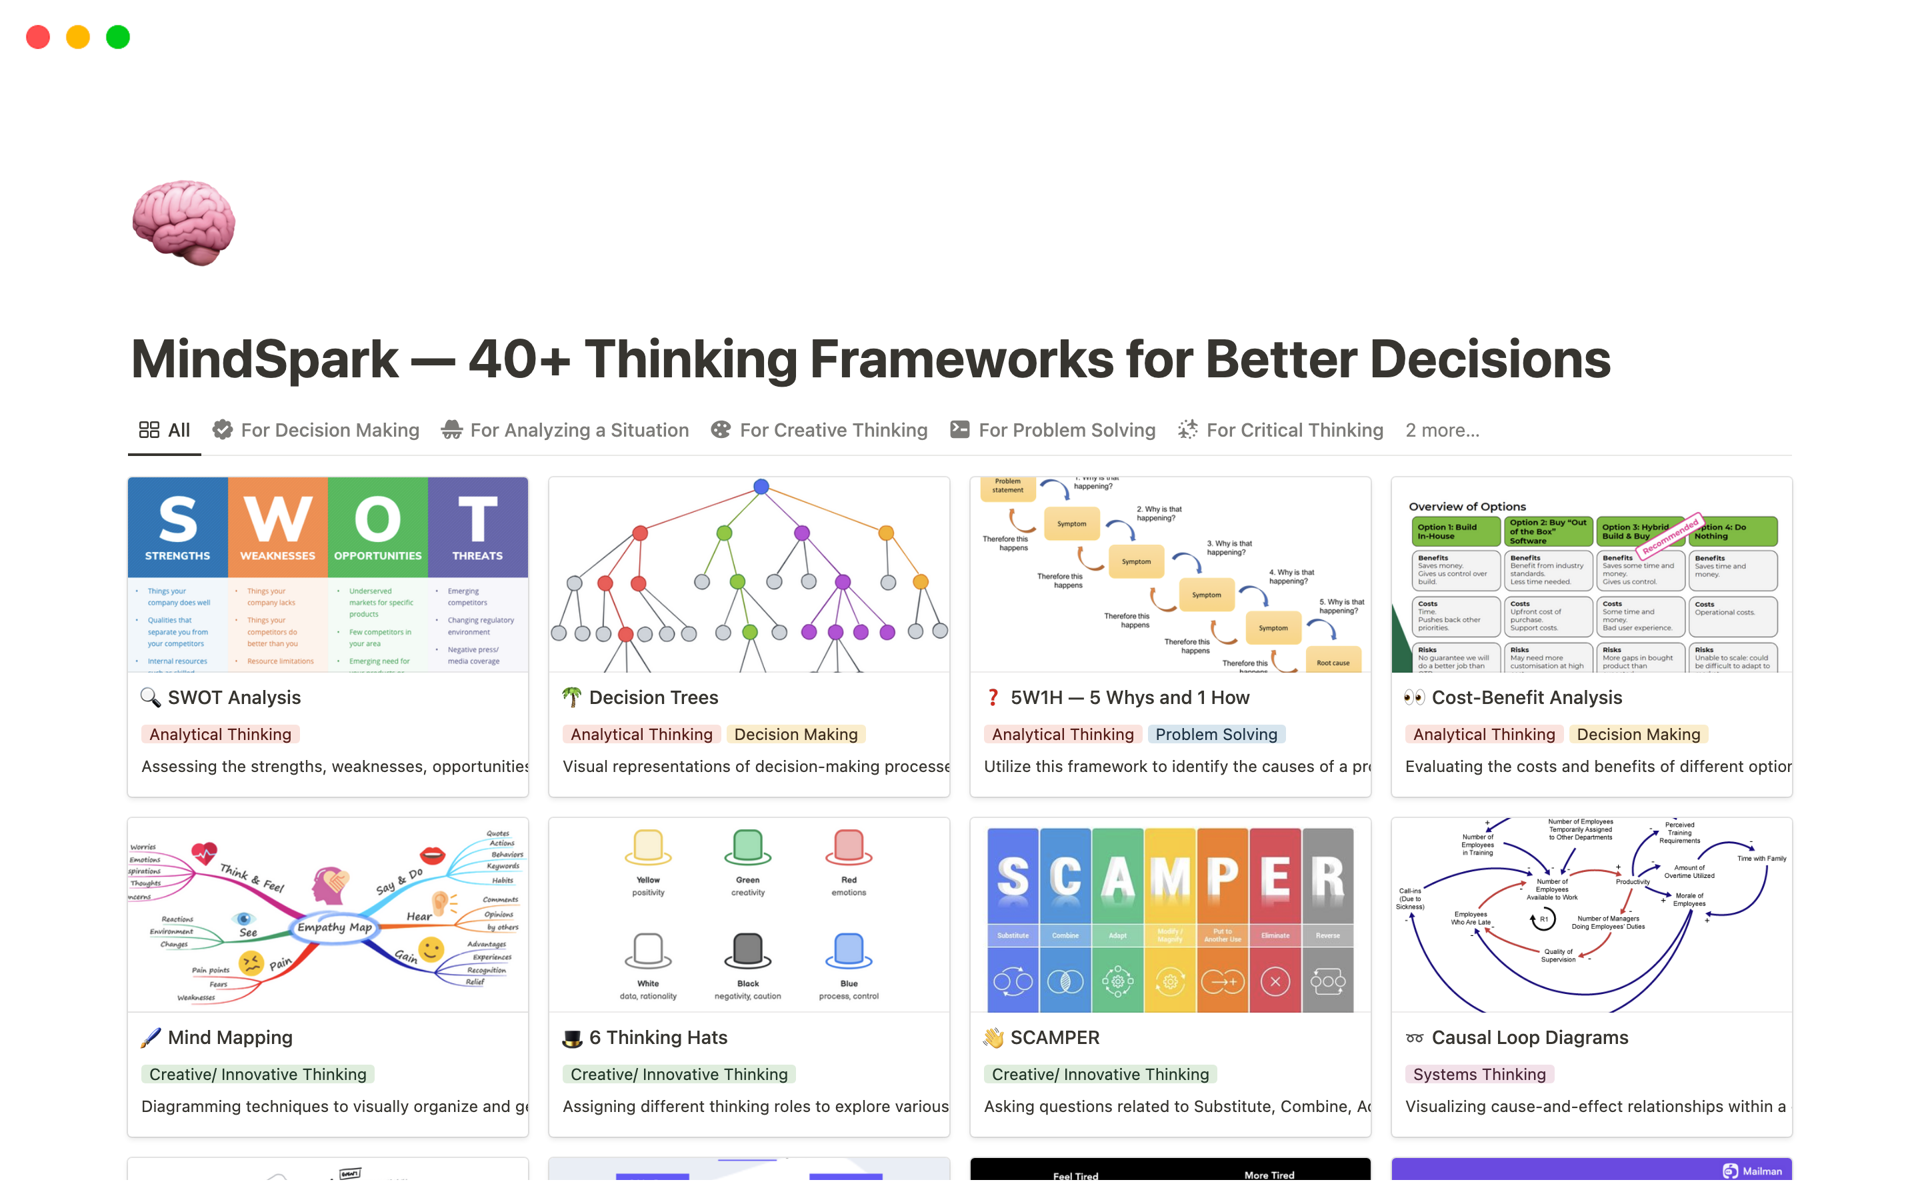 No more indecisiveness. No more getting stuck. No more frustration. 40+ frameworks to help you think smarter and make better decisions are here.